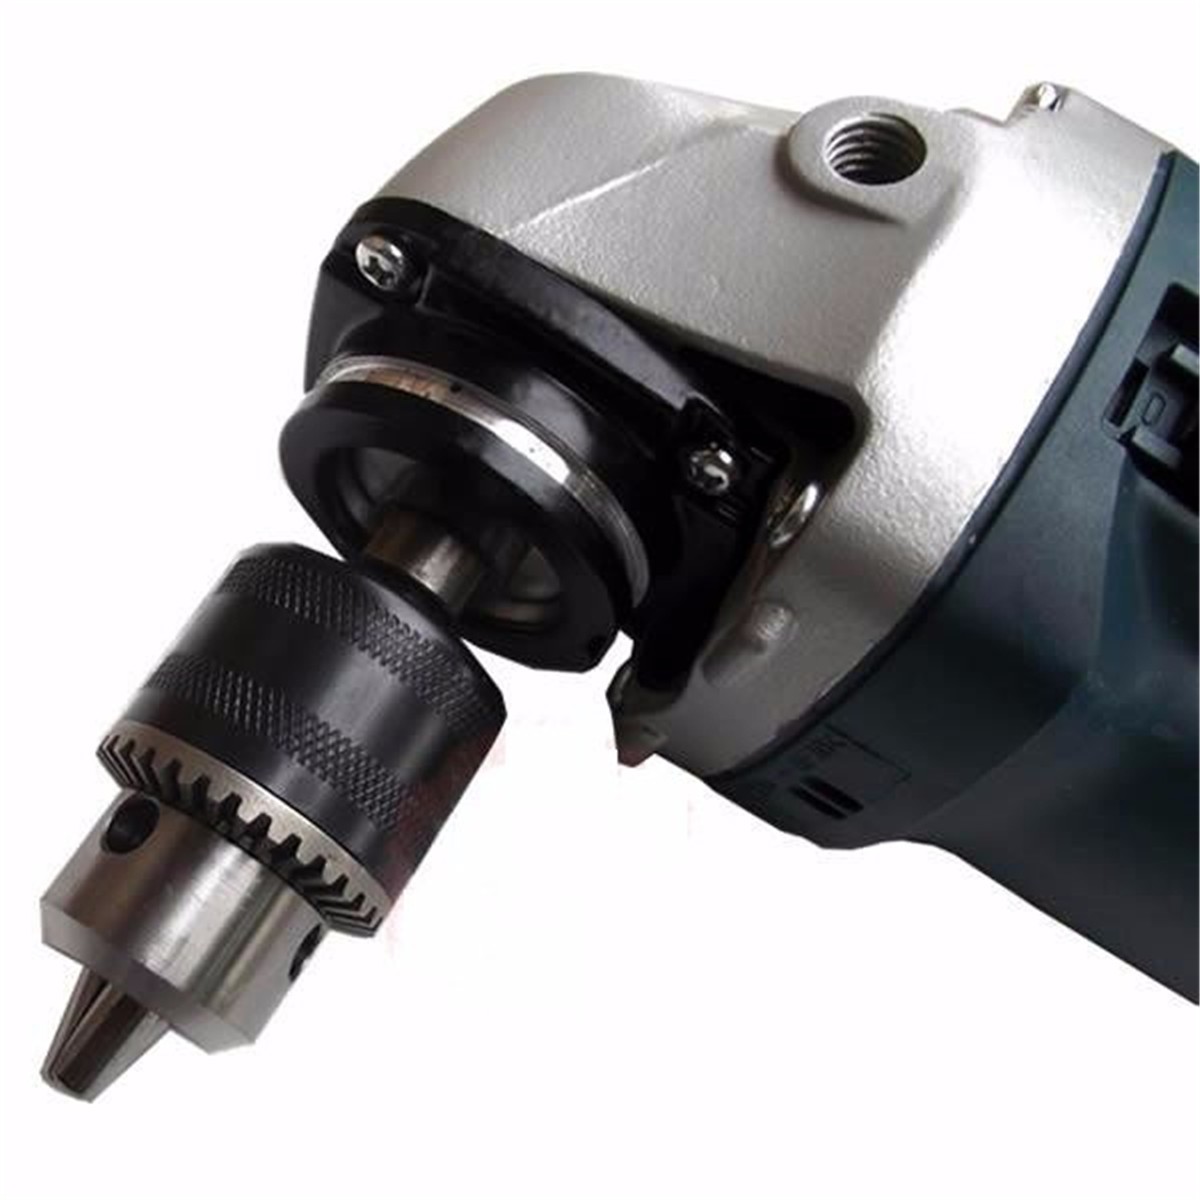 

1-10mm Metal Stable Keyed Drill Chuck Convertor 100 Angle Grinder Drill Chuck M10 Thread